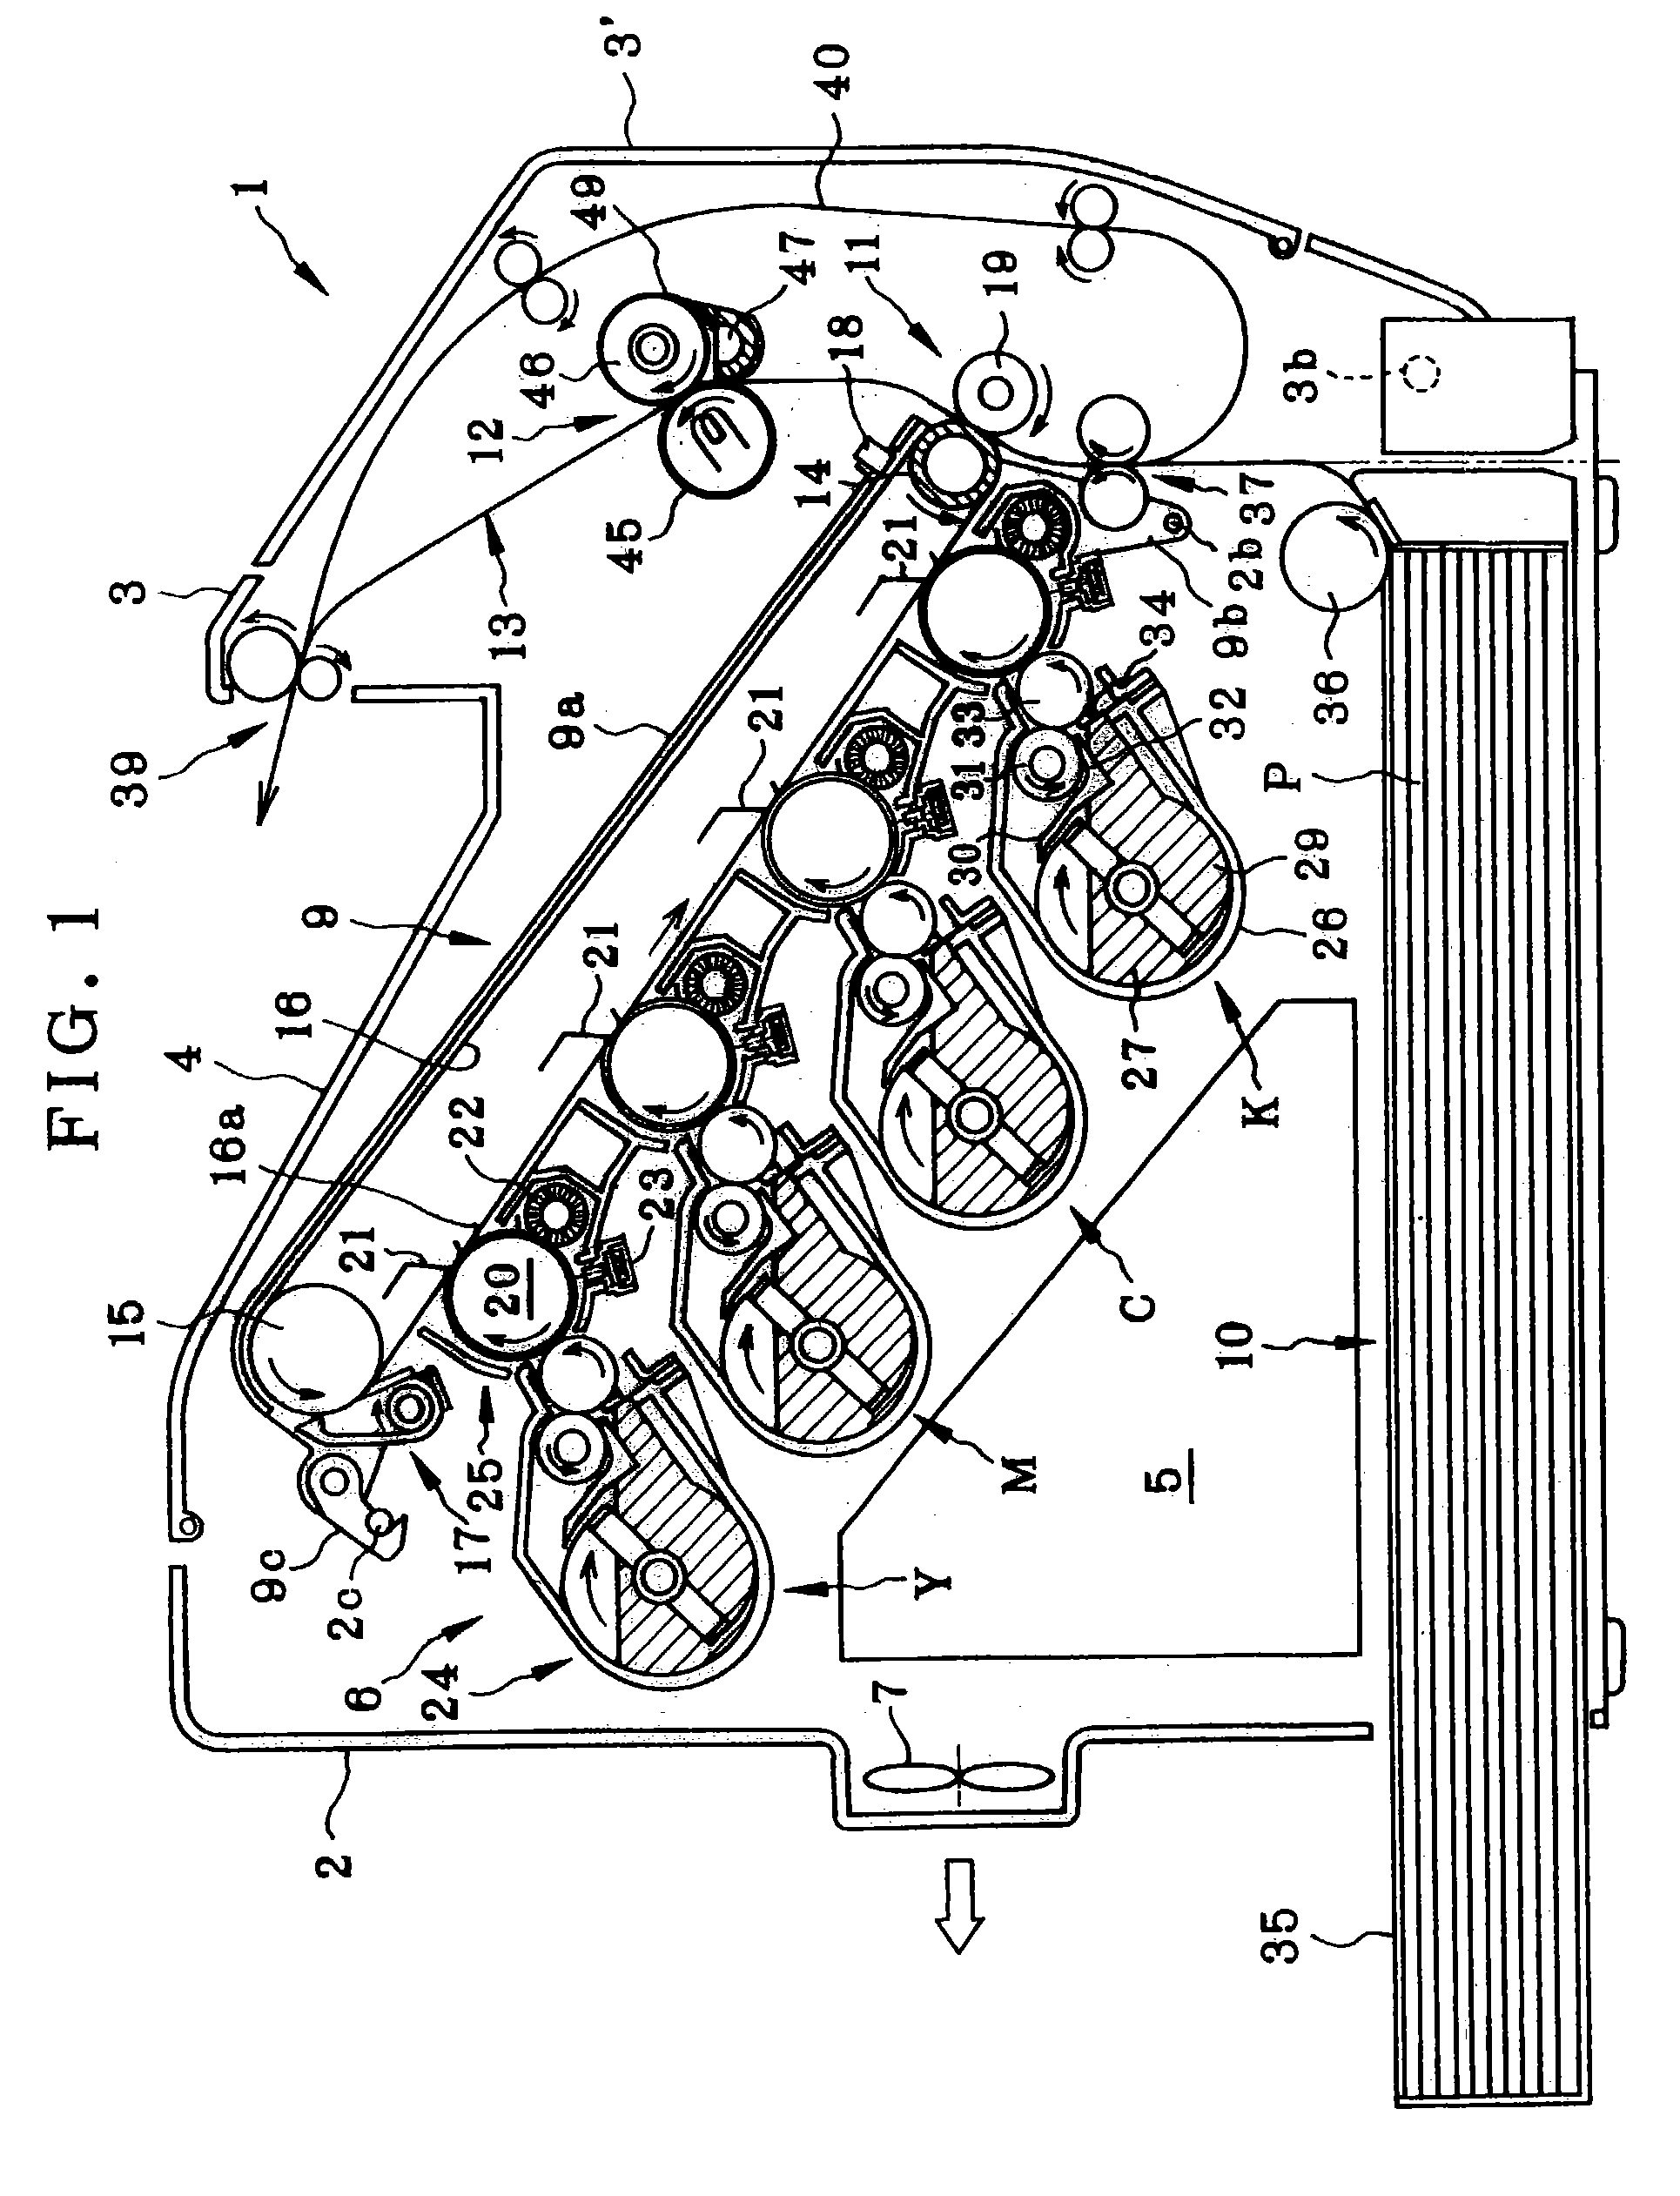 Image carrier cartridge, an exposure head shielded from light, and image forming apparatus using these